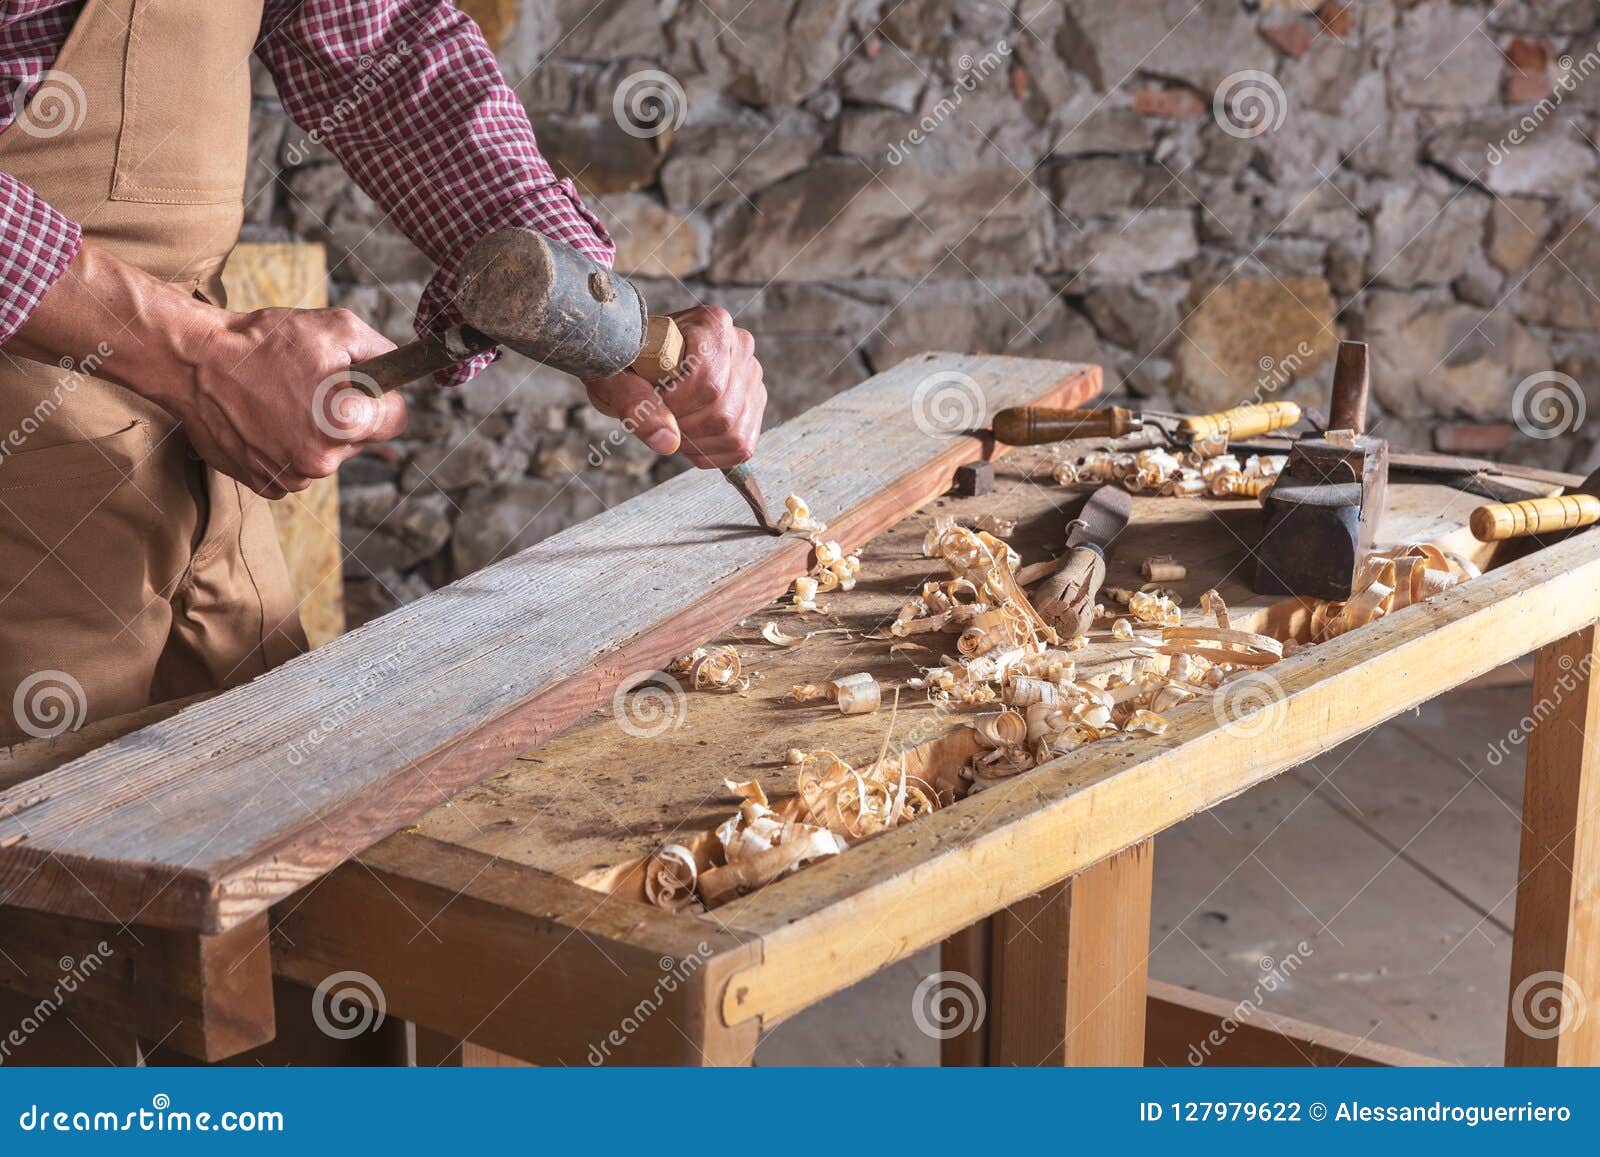 woodworker using chisel to smooth down wood